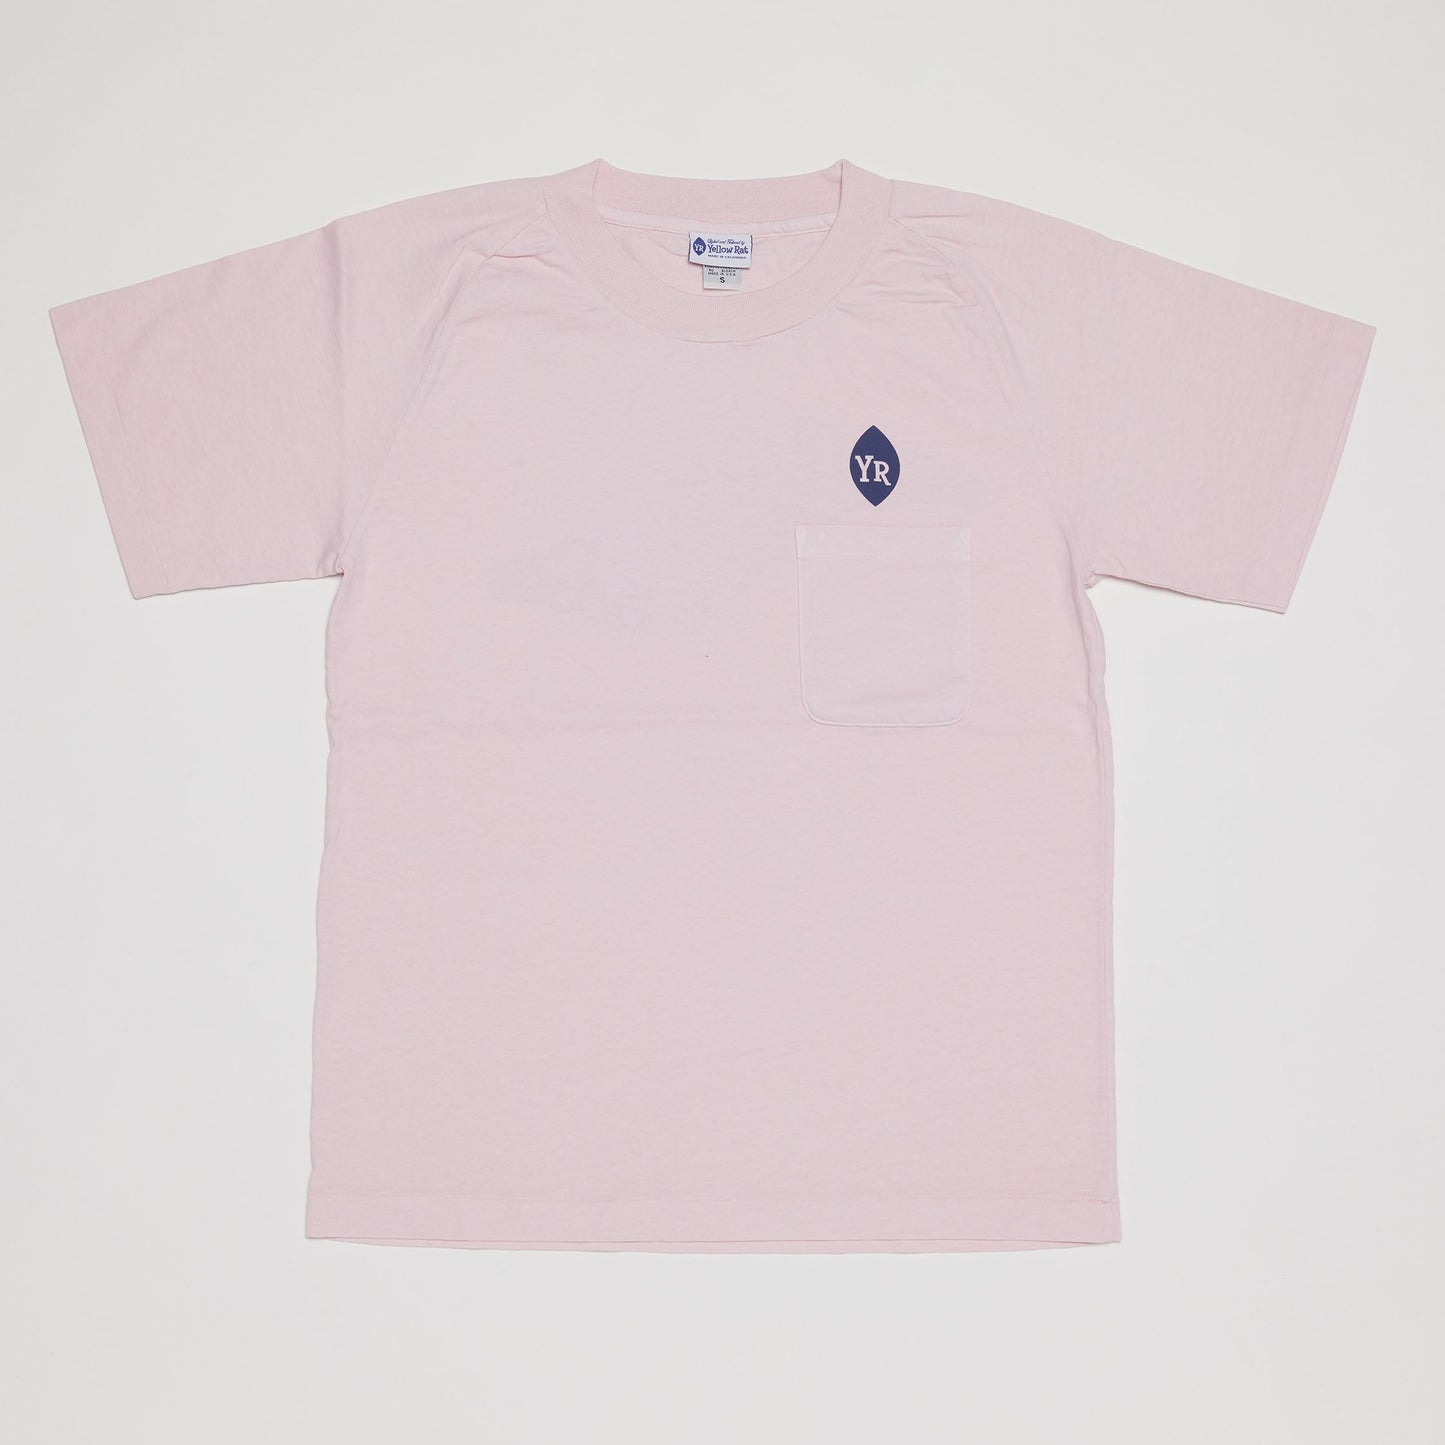 Some Like It Smooth T-Shirt II (Pink)